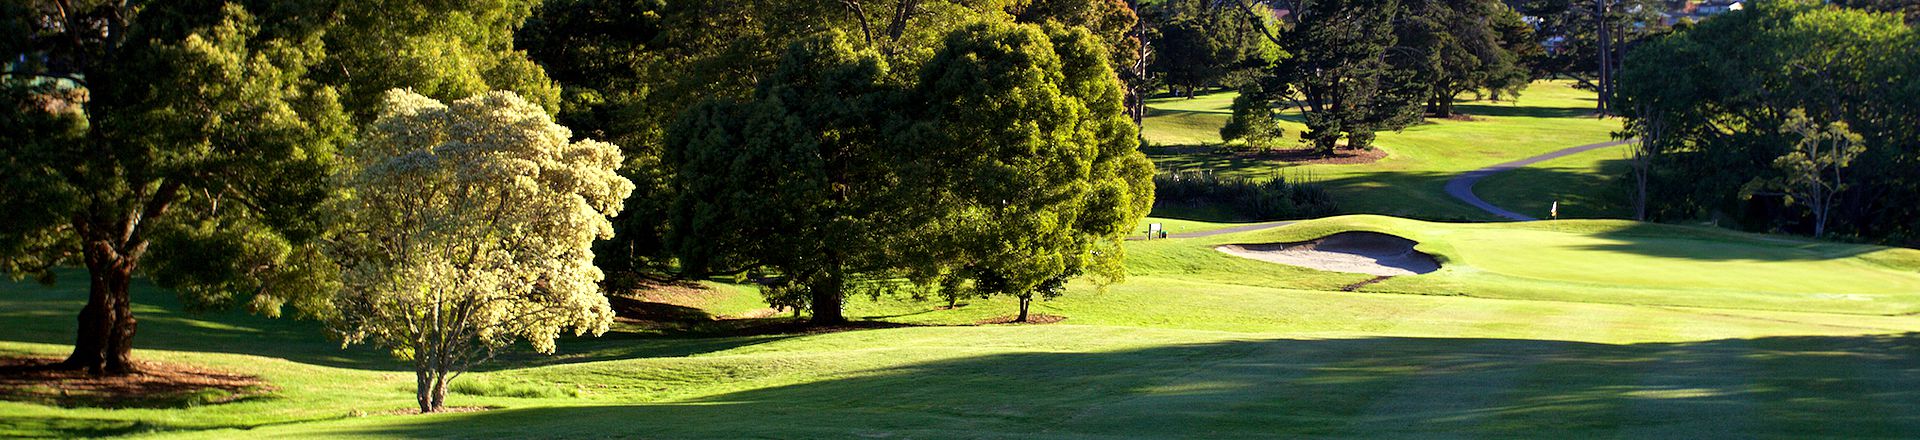 <strong>MAUNGAKIEKIE GOLF CLUB<span><b>view larger</b></span></strong><i>→</i>